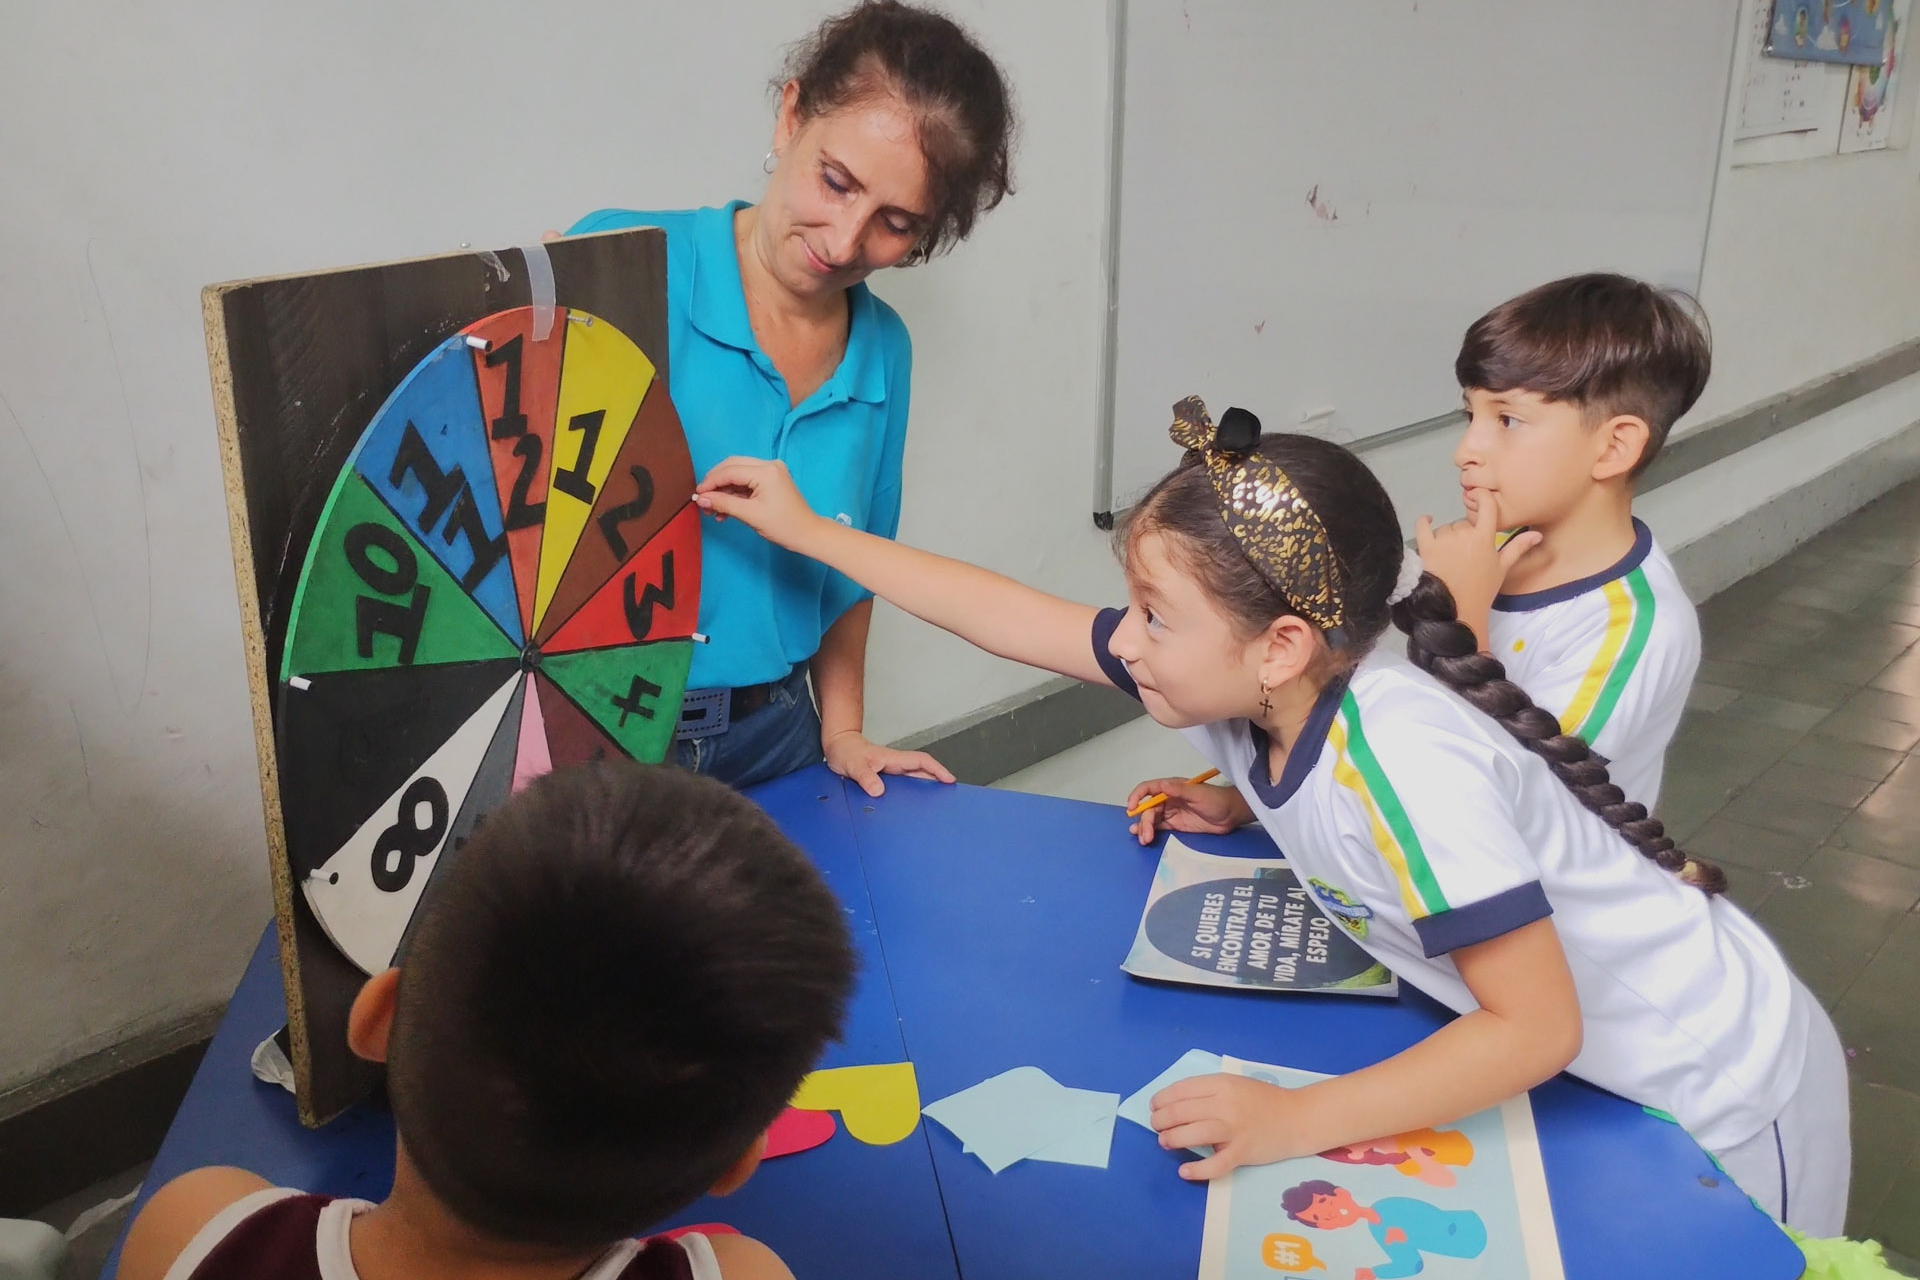 A lady playing spin the wheel with children.